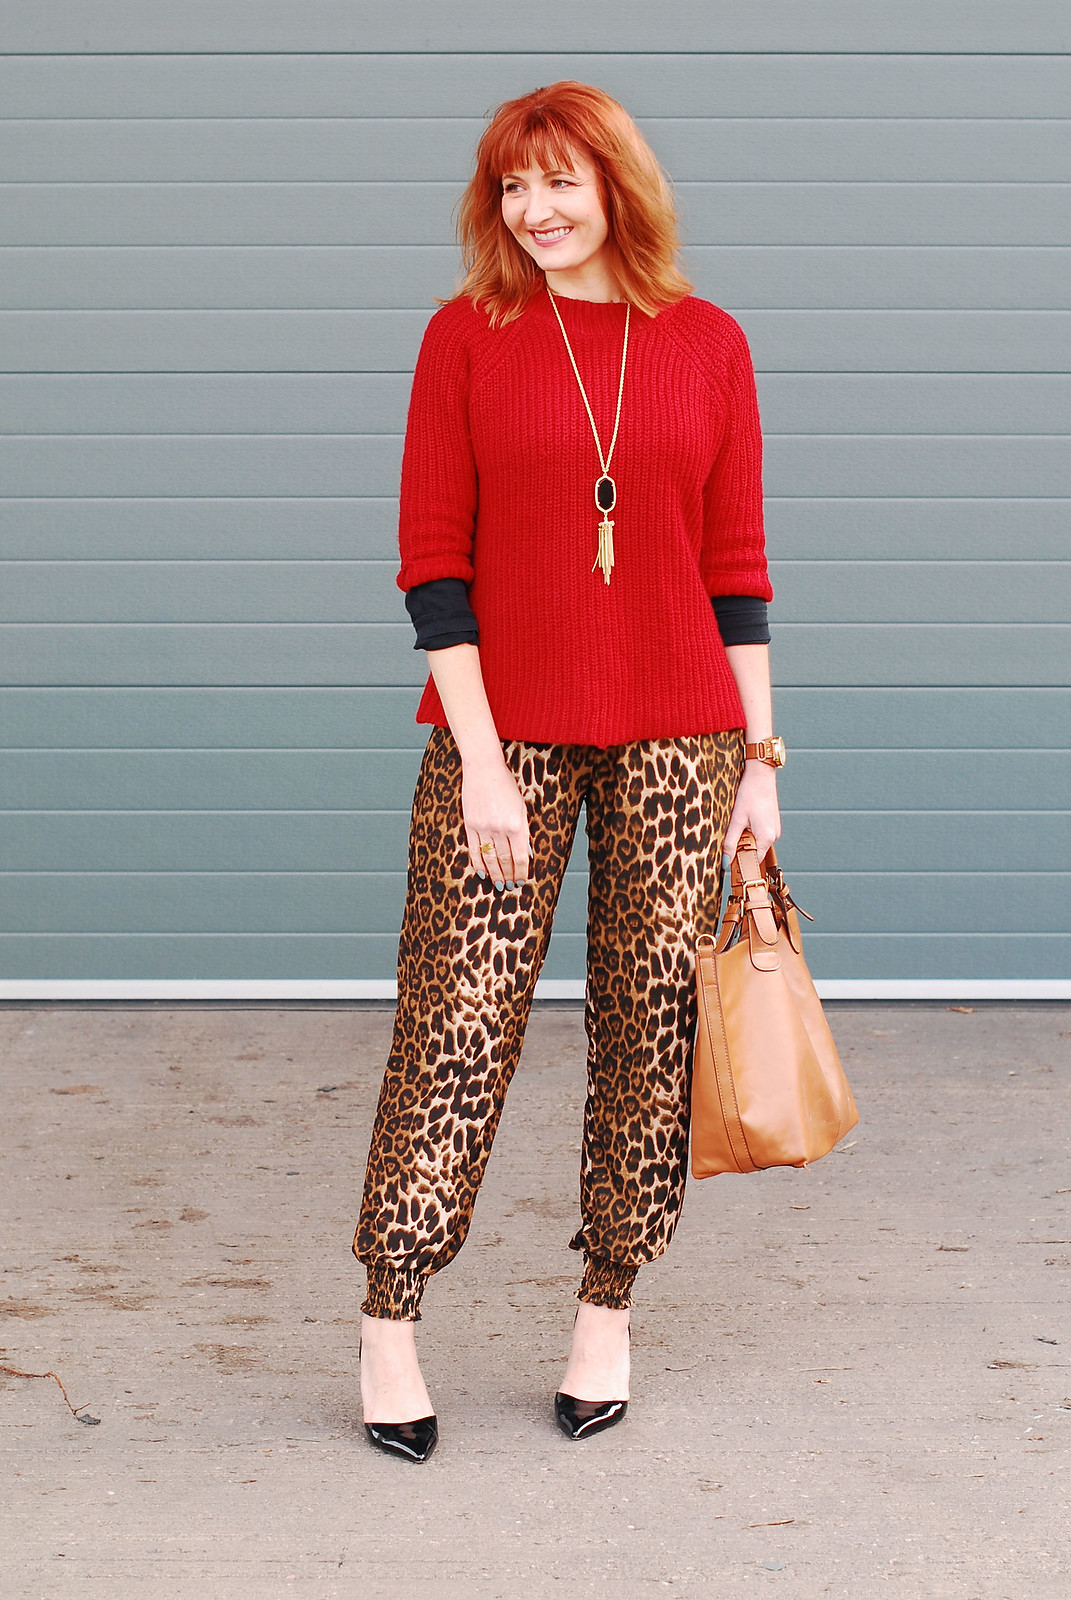 Bold autumn/fall/winter outfit: Red three quarter sleeve sweater, leopard print joggers, pointed black heels | Not Dressed As Lamb